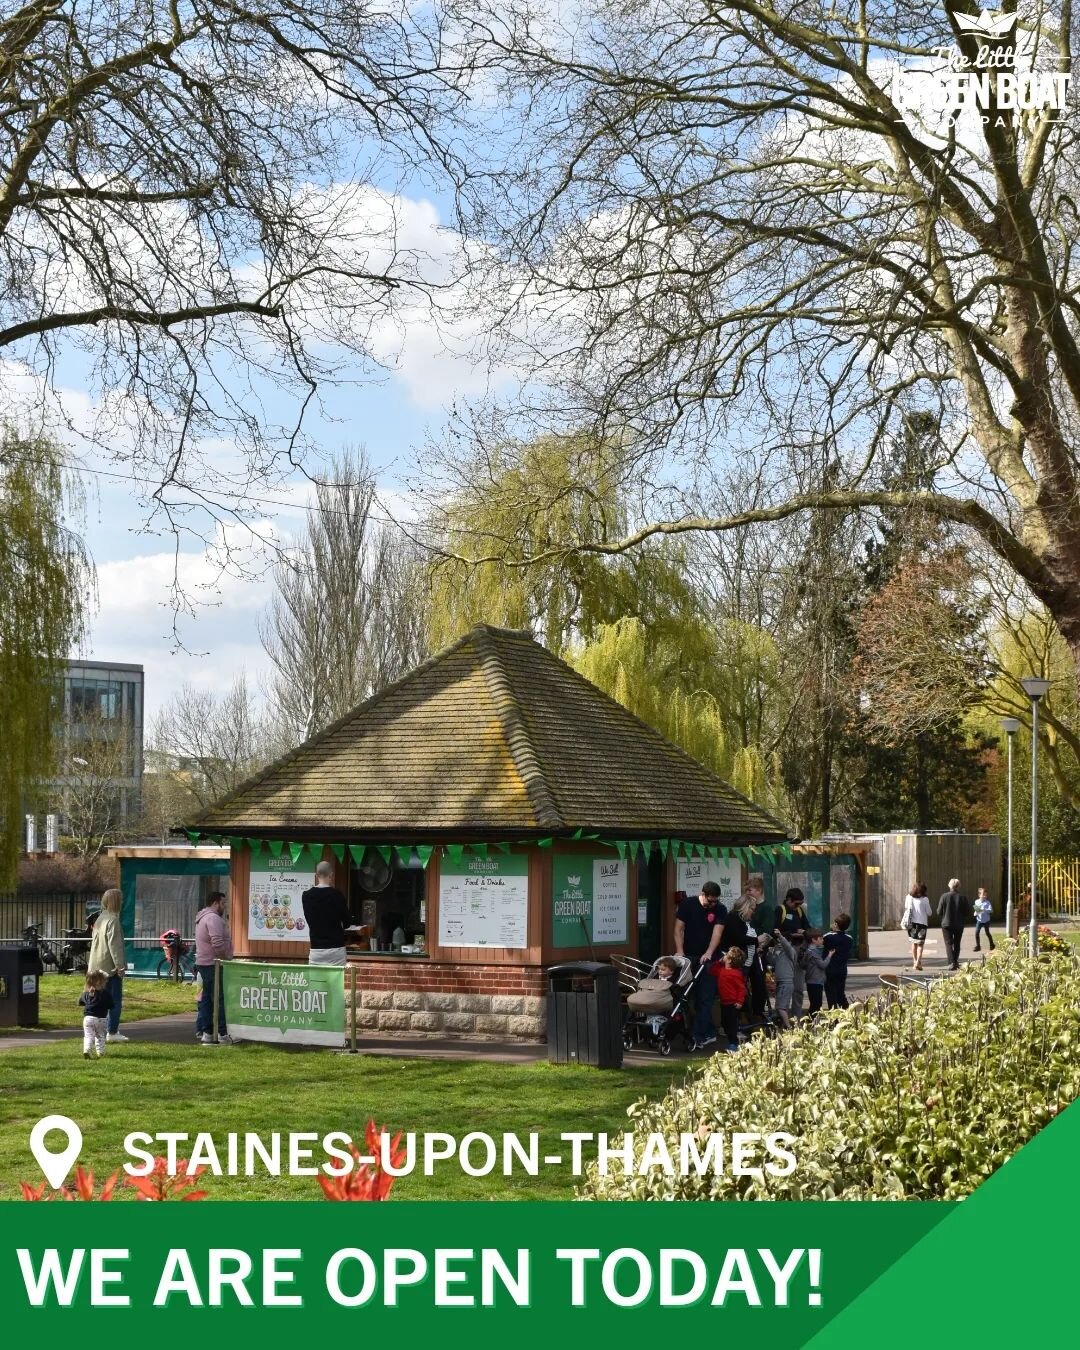 Our cafe is open in Lammas Park, Staines-Upon-Thames! 

Enjoy some of our fantastic food and beverages this weekend! 

#staines #stainesuponthames #cafenearlondon #cafelondon #surreycafe #daysout #daysoutwithkids #daysoutwiththekids #littlegreenboatc